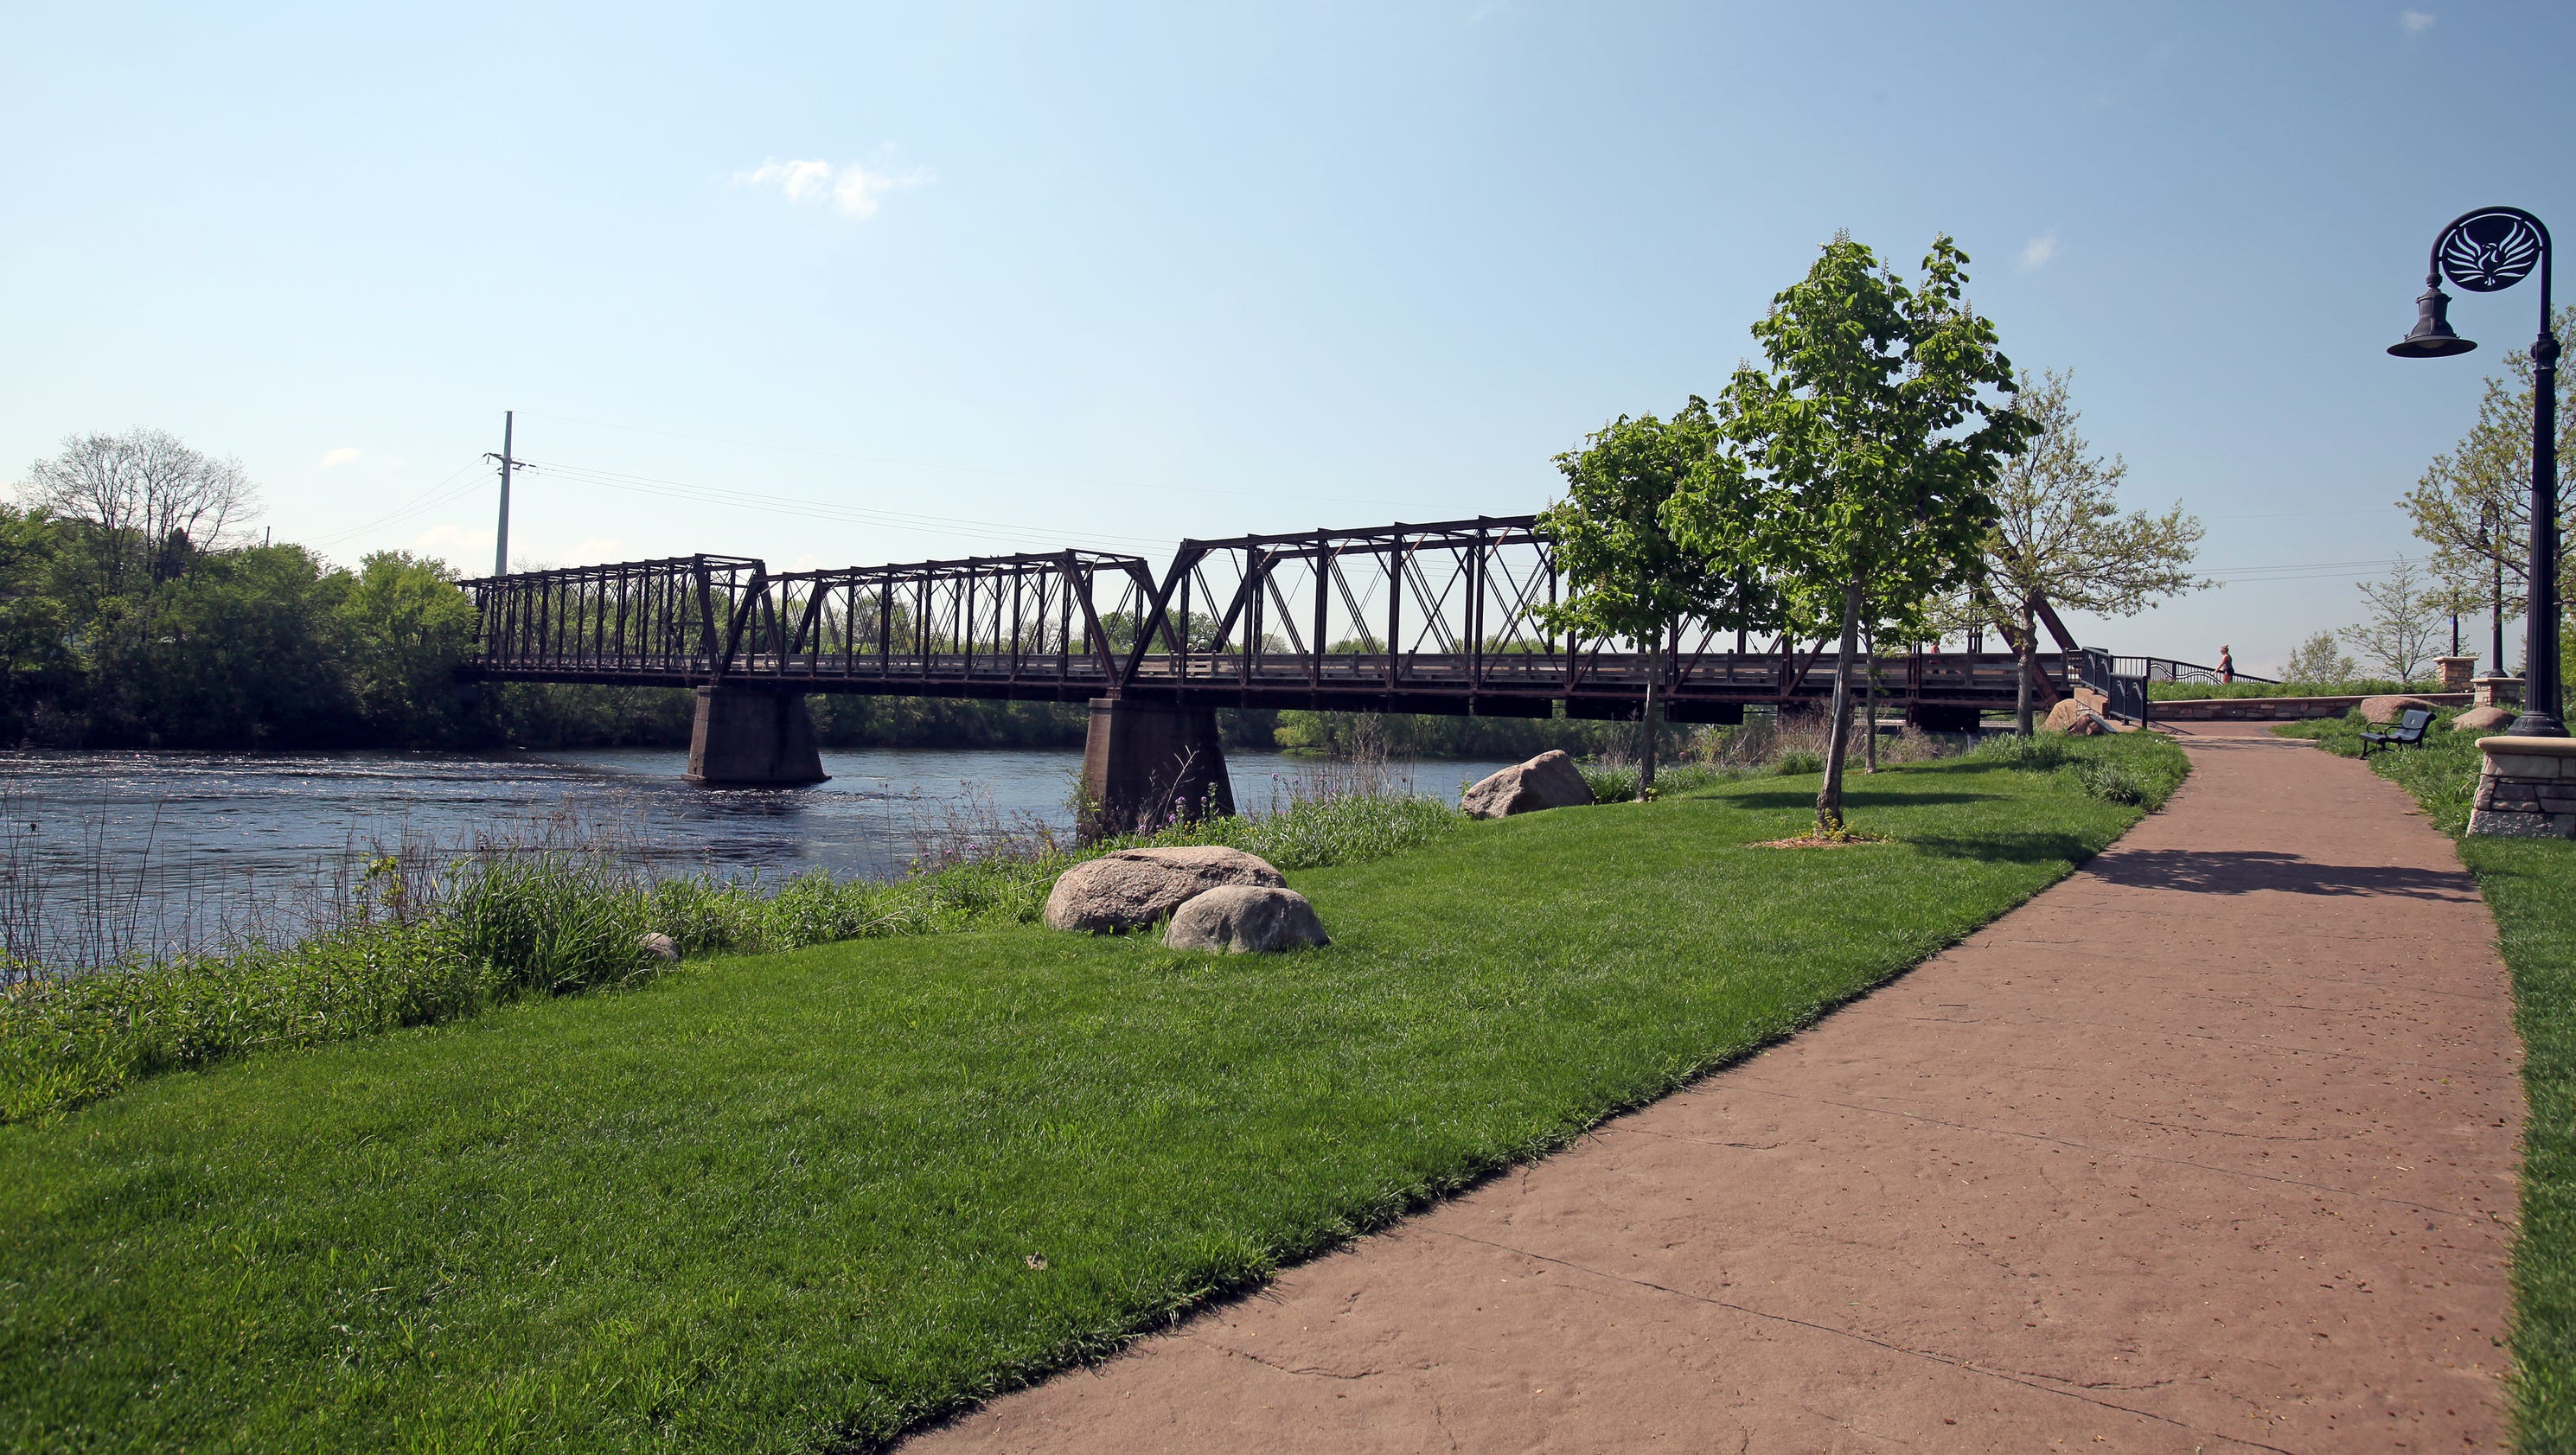 Trip Tips: Things to do in Eau Claire and Chippewa Falls3200 x 1680